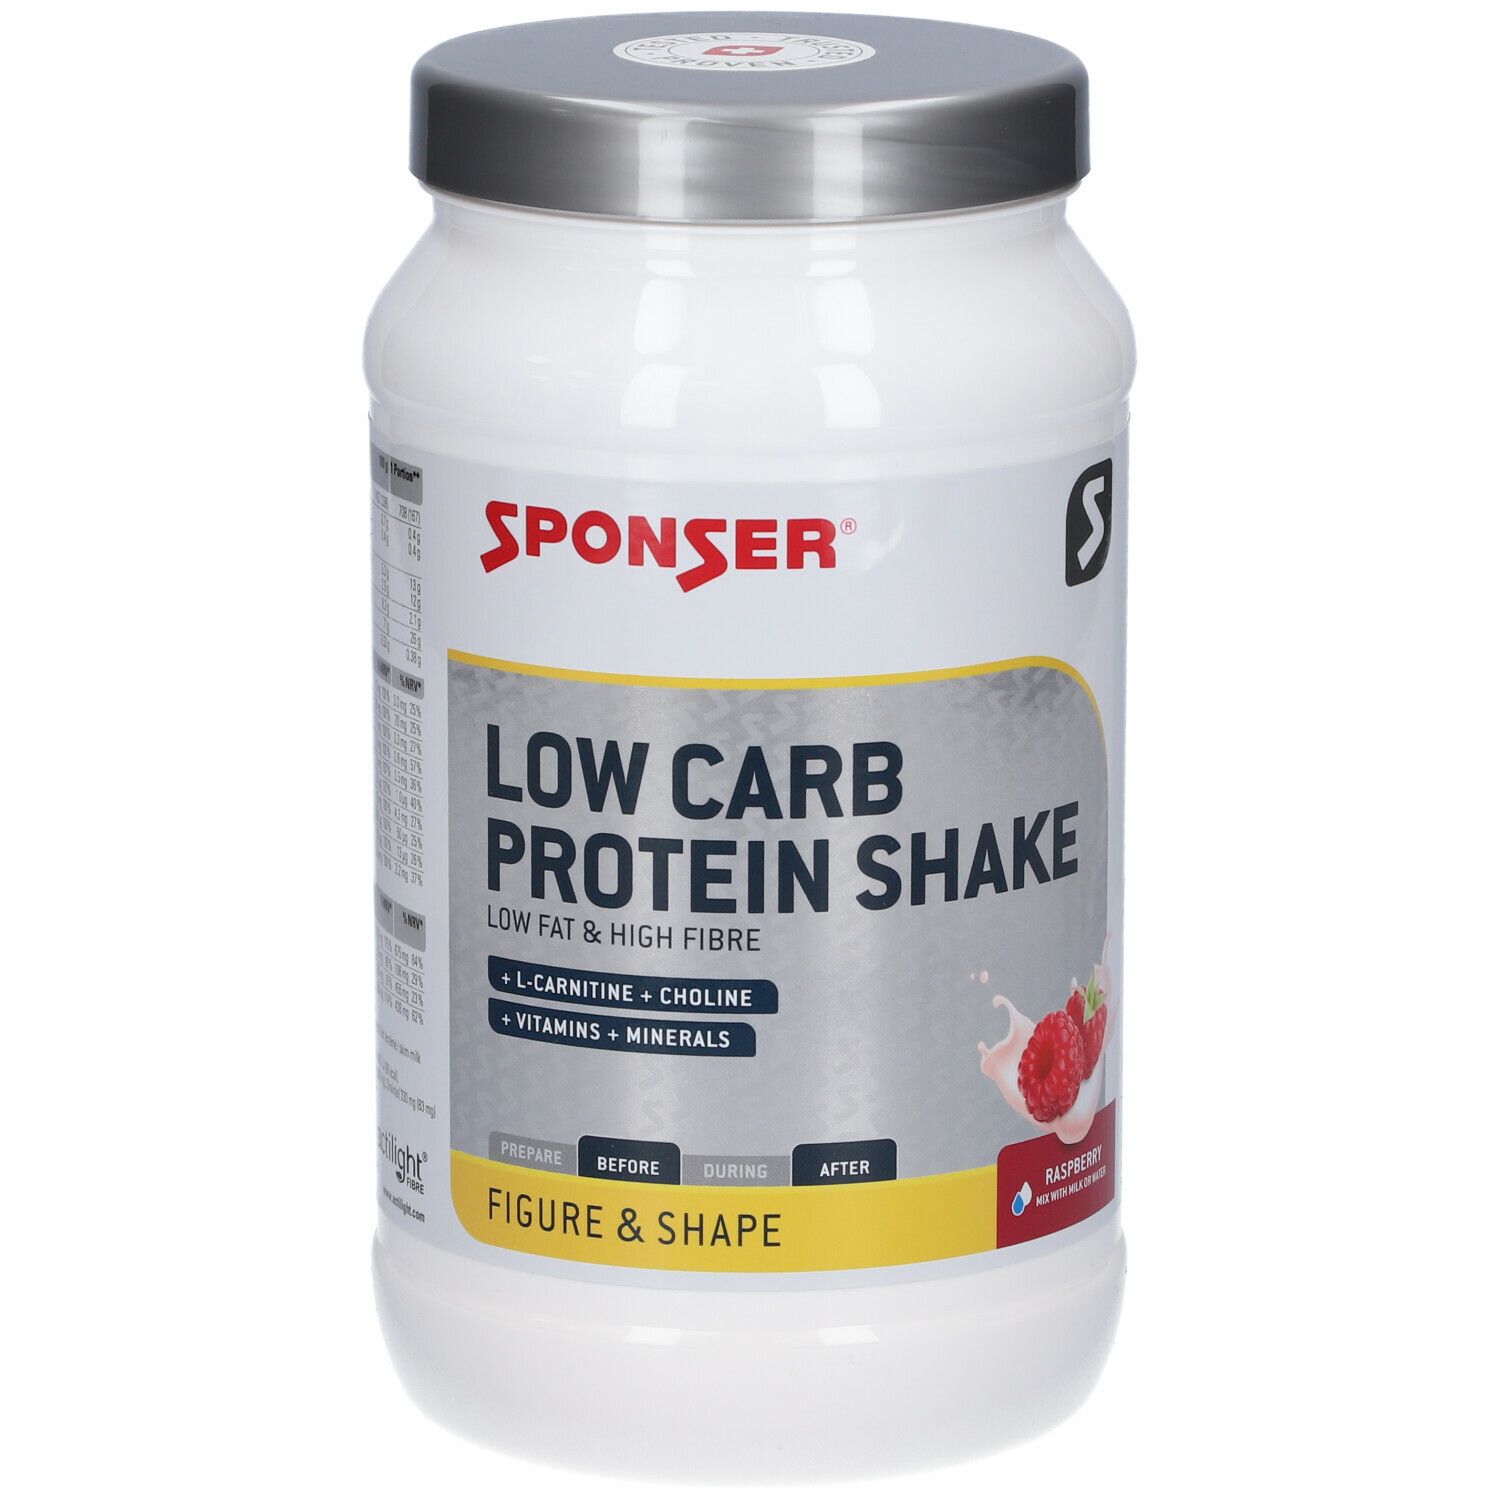 SPONSER® LOW CARB PROTEIN SHAKE, Himbeere